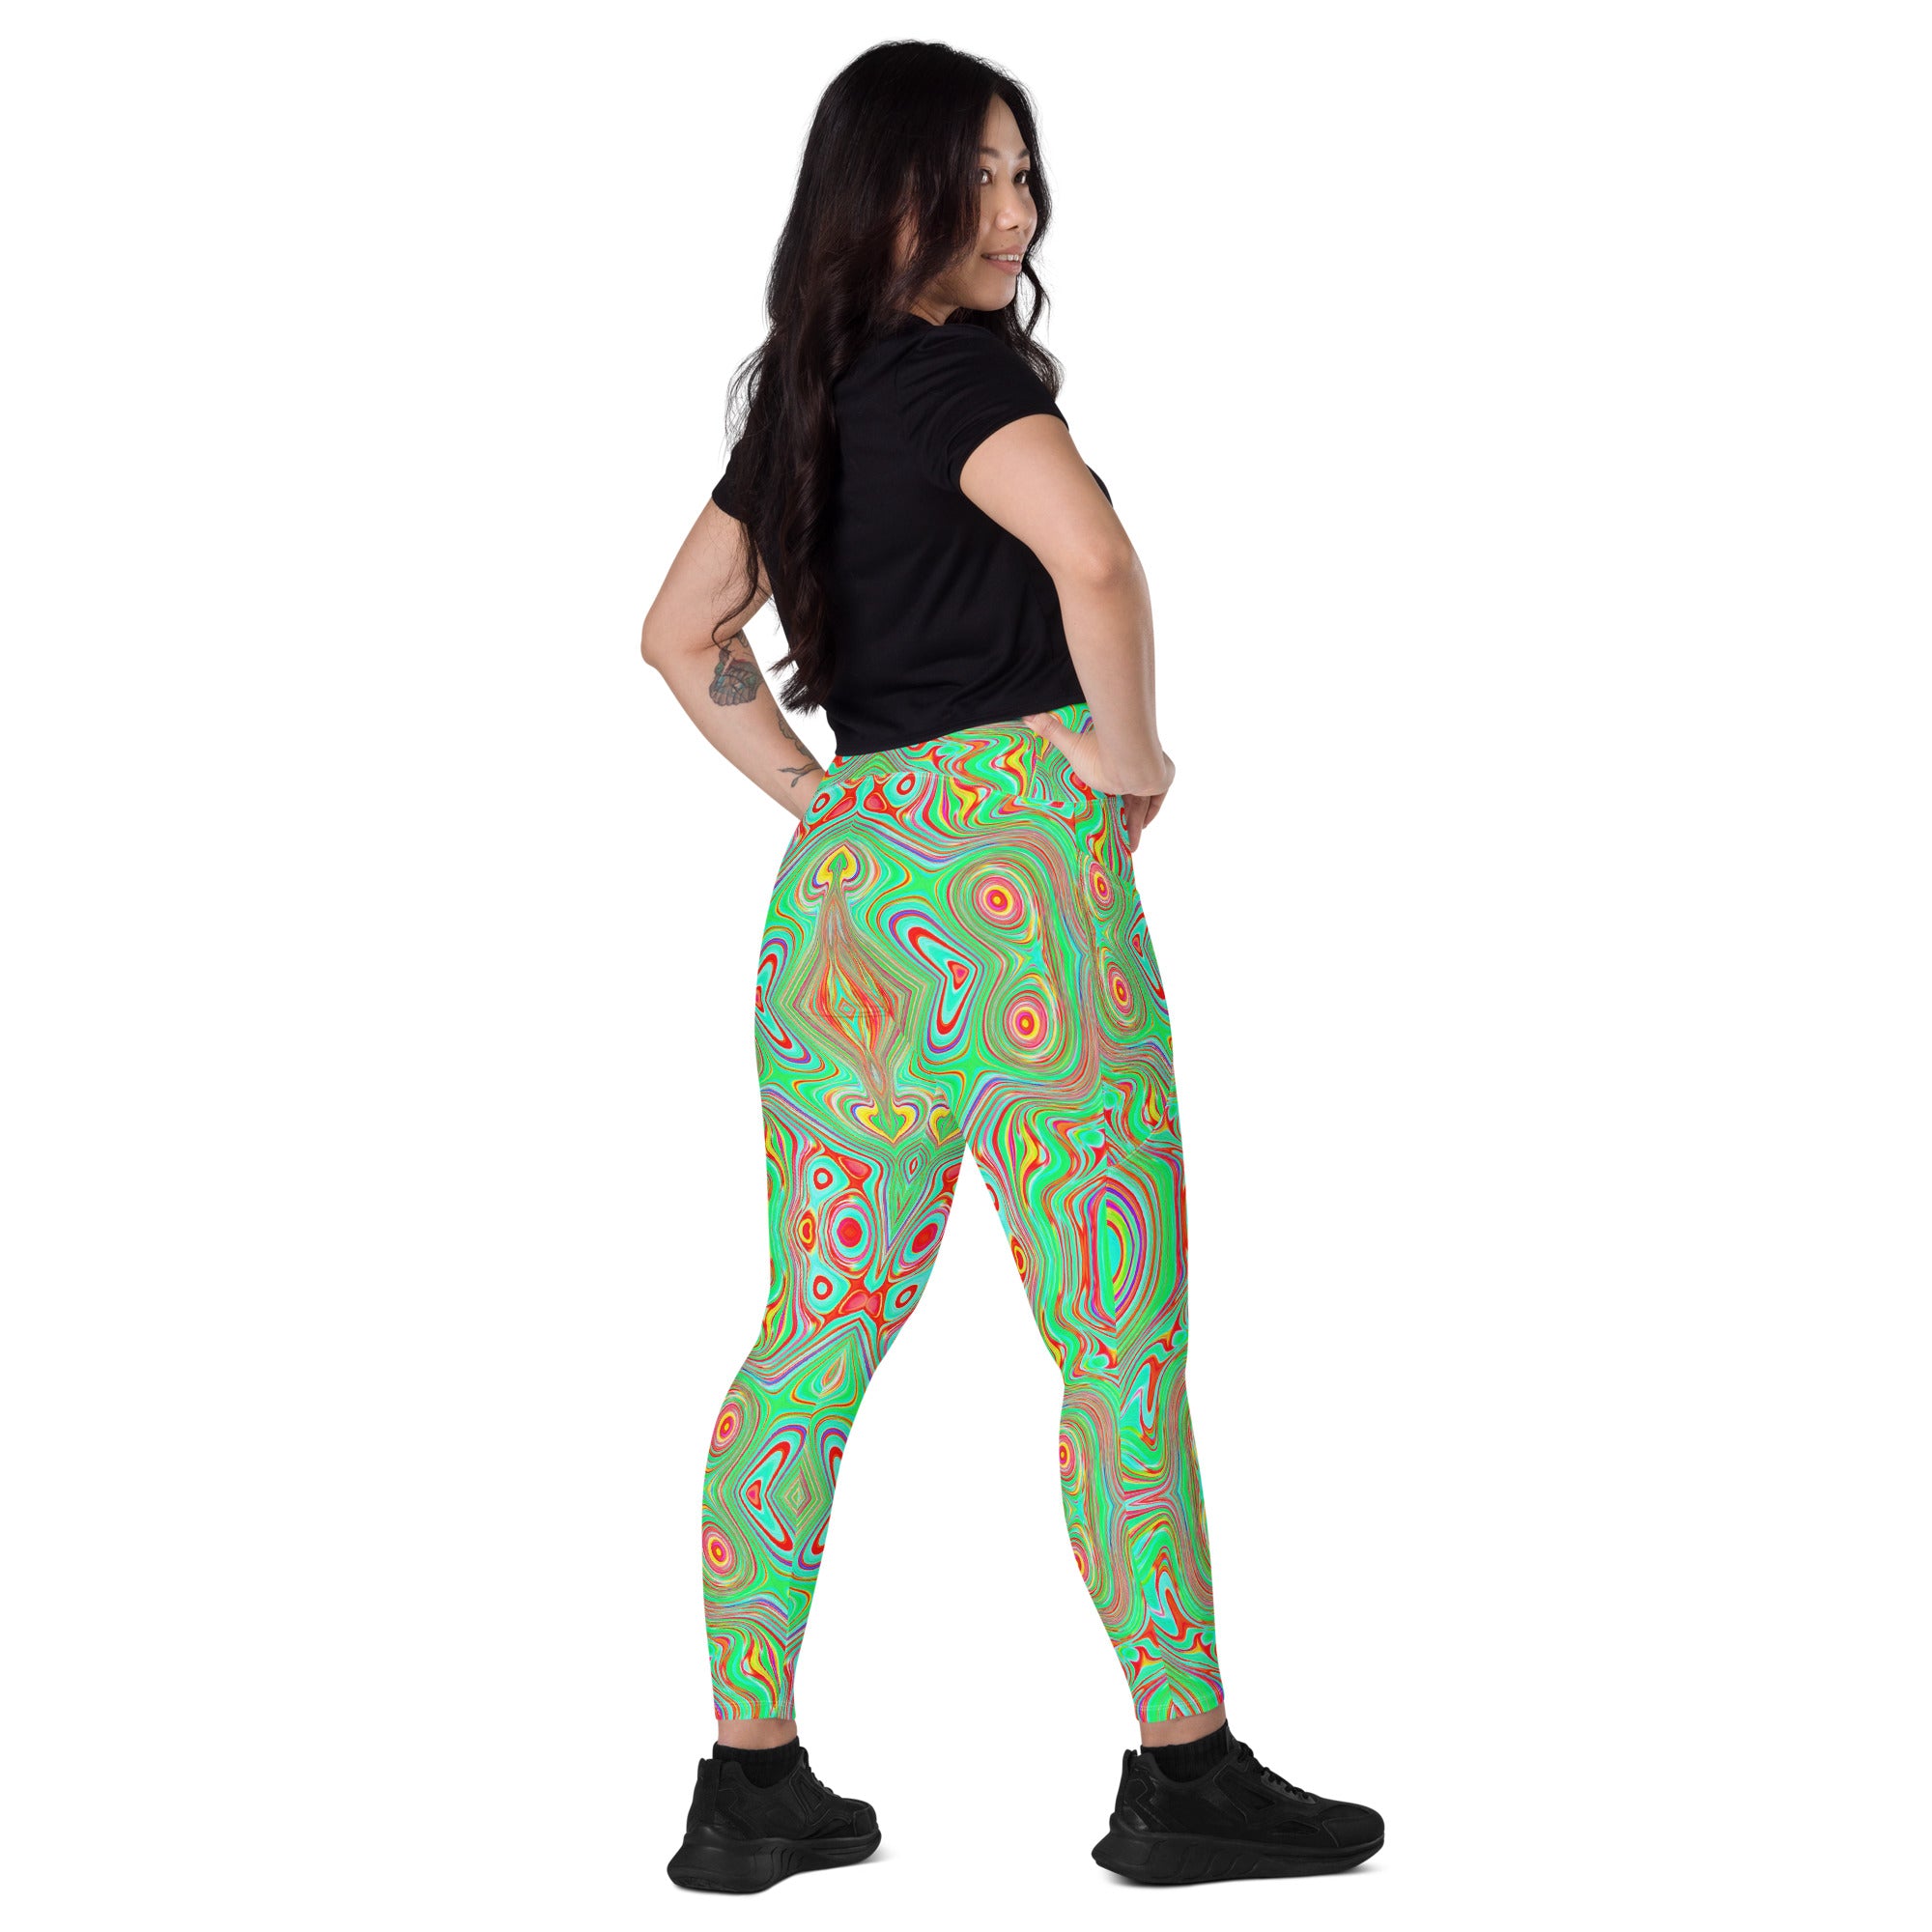 Crossover Leggings, Trippy Retro Orange and Lime Green Abstract Pattern